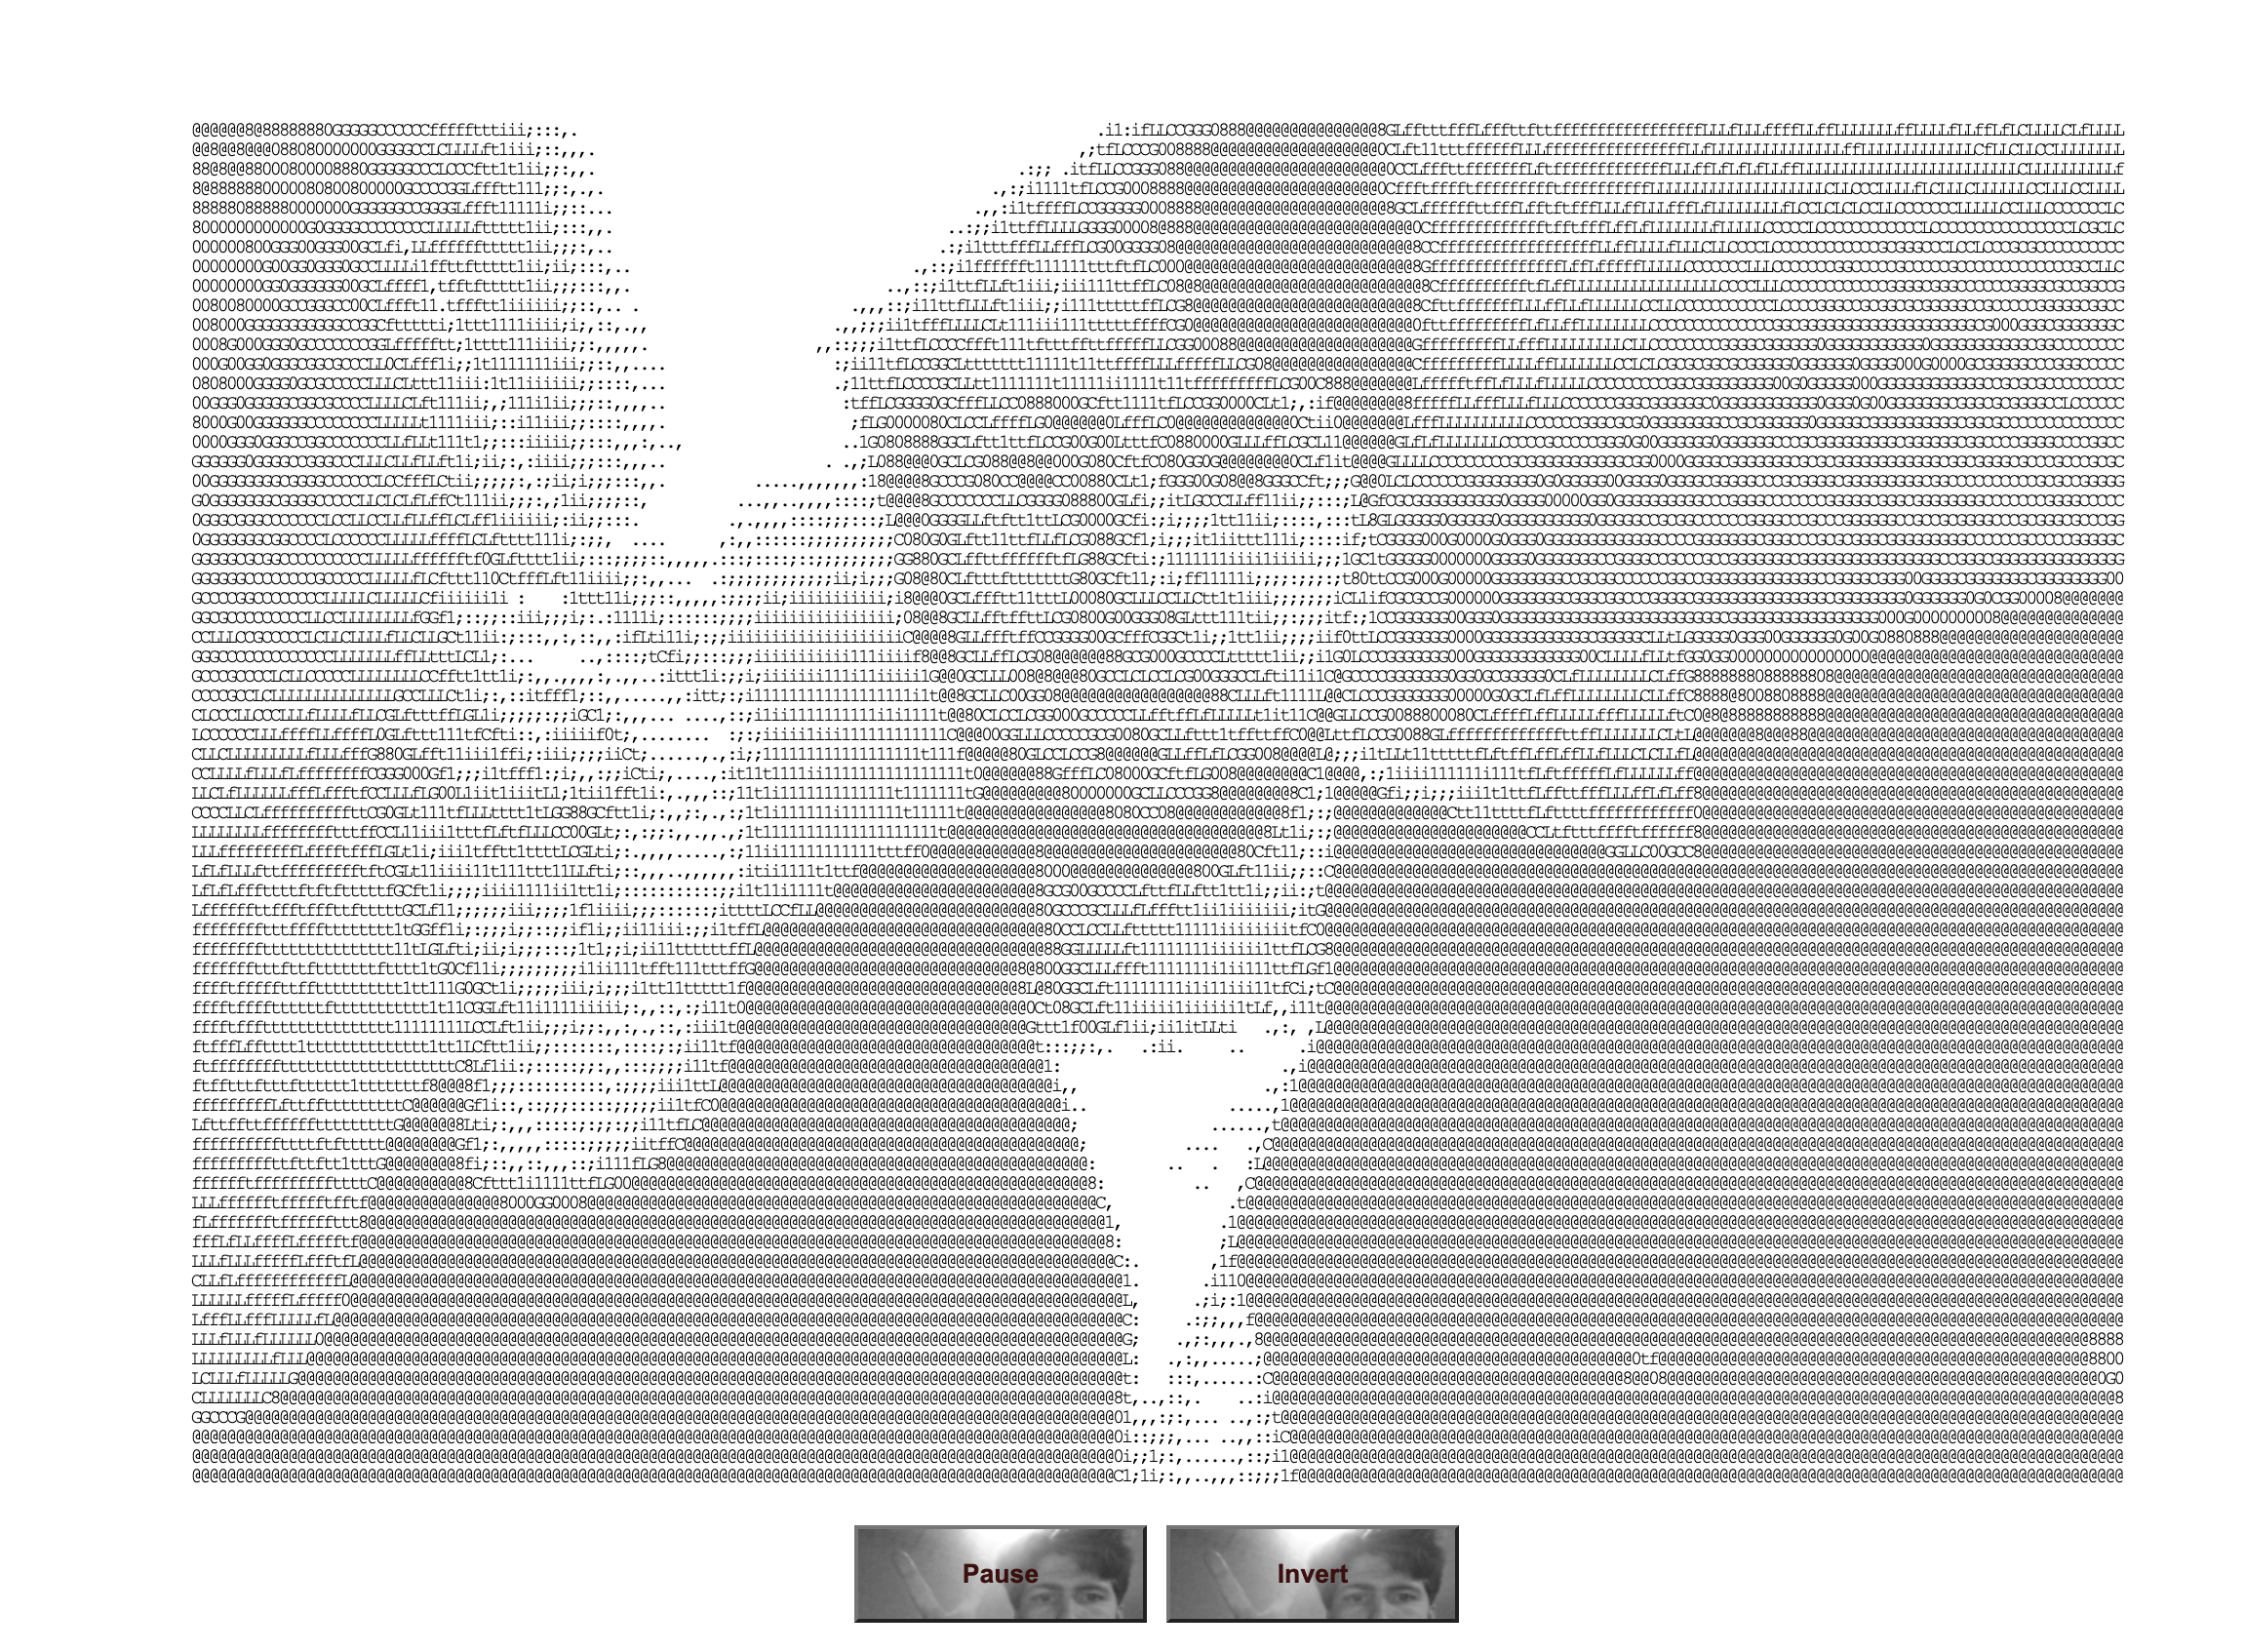 Ascii image in black and white